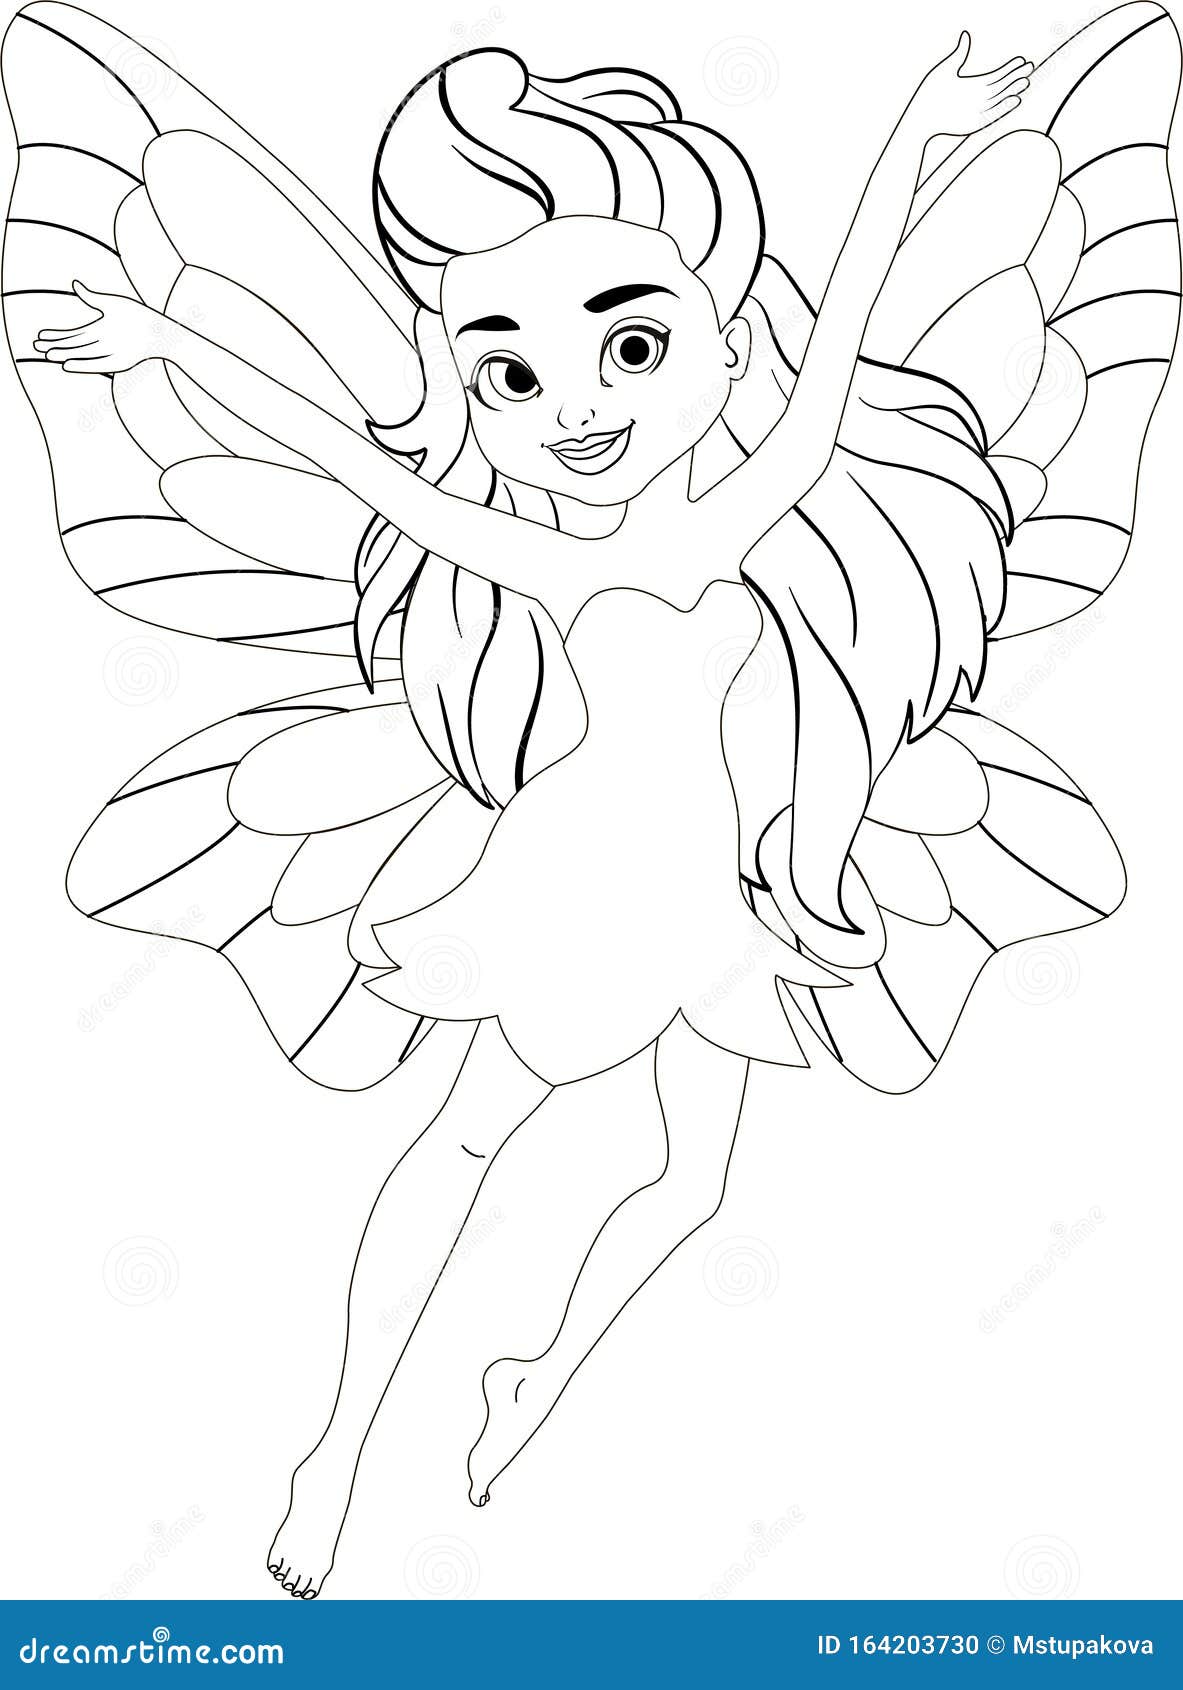 Illustration of a Cute Pink Spring Fairy in Flight. Beautiful Cartoon Girl  with Wings Stock Vector - Illustration of drawing, badge: 164203730